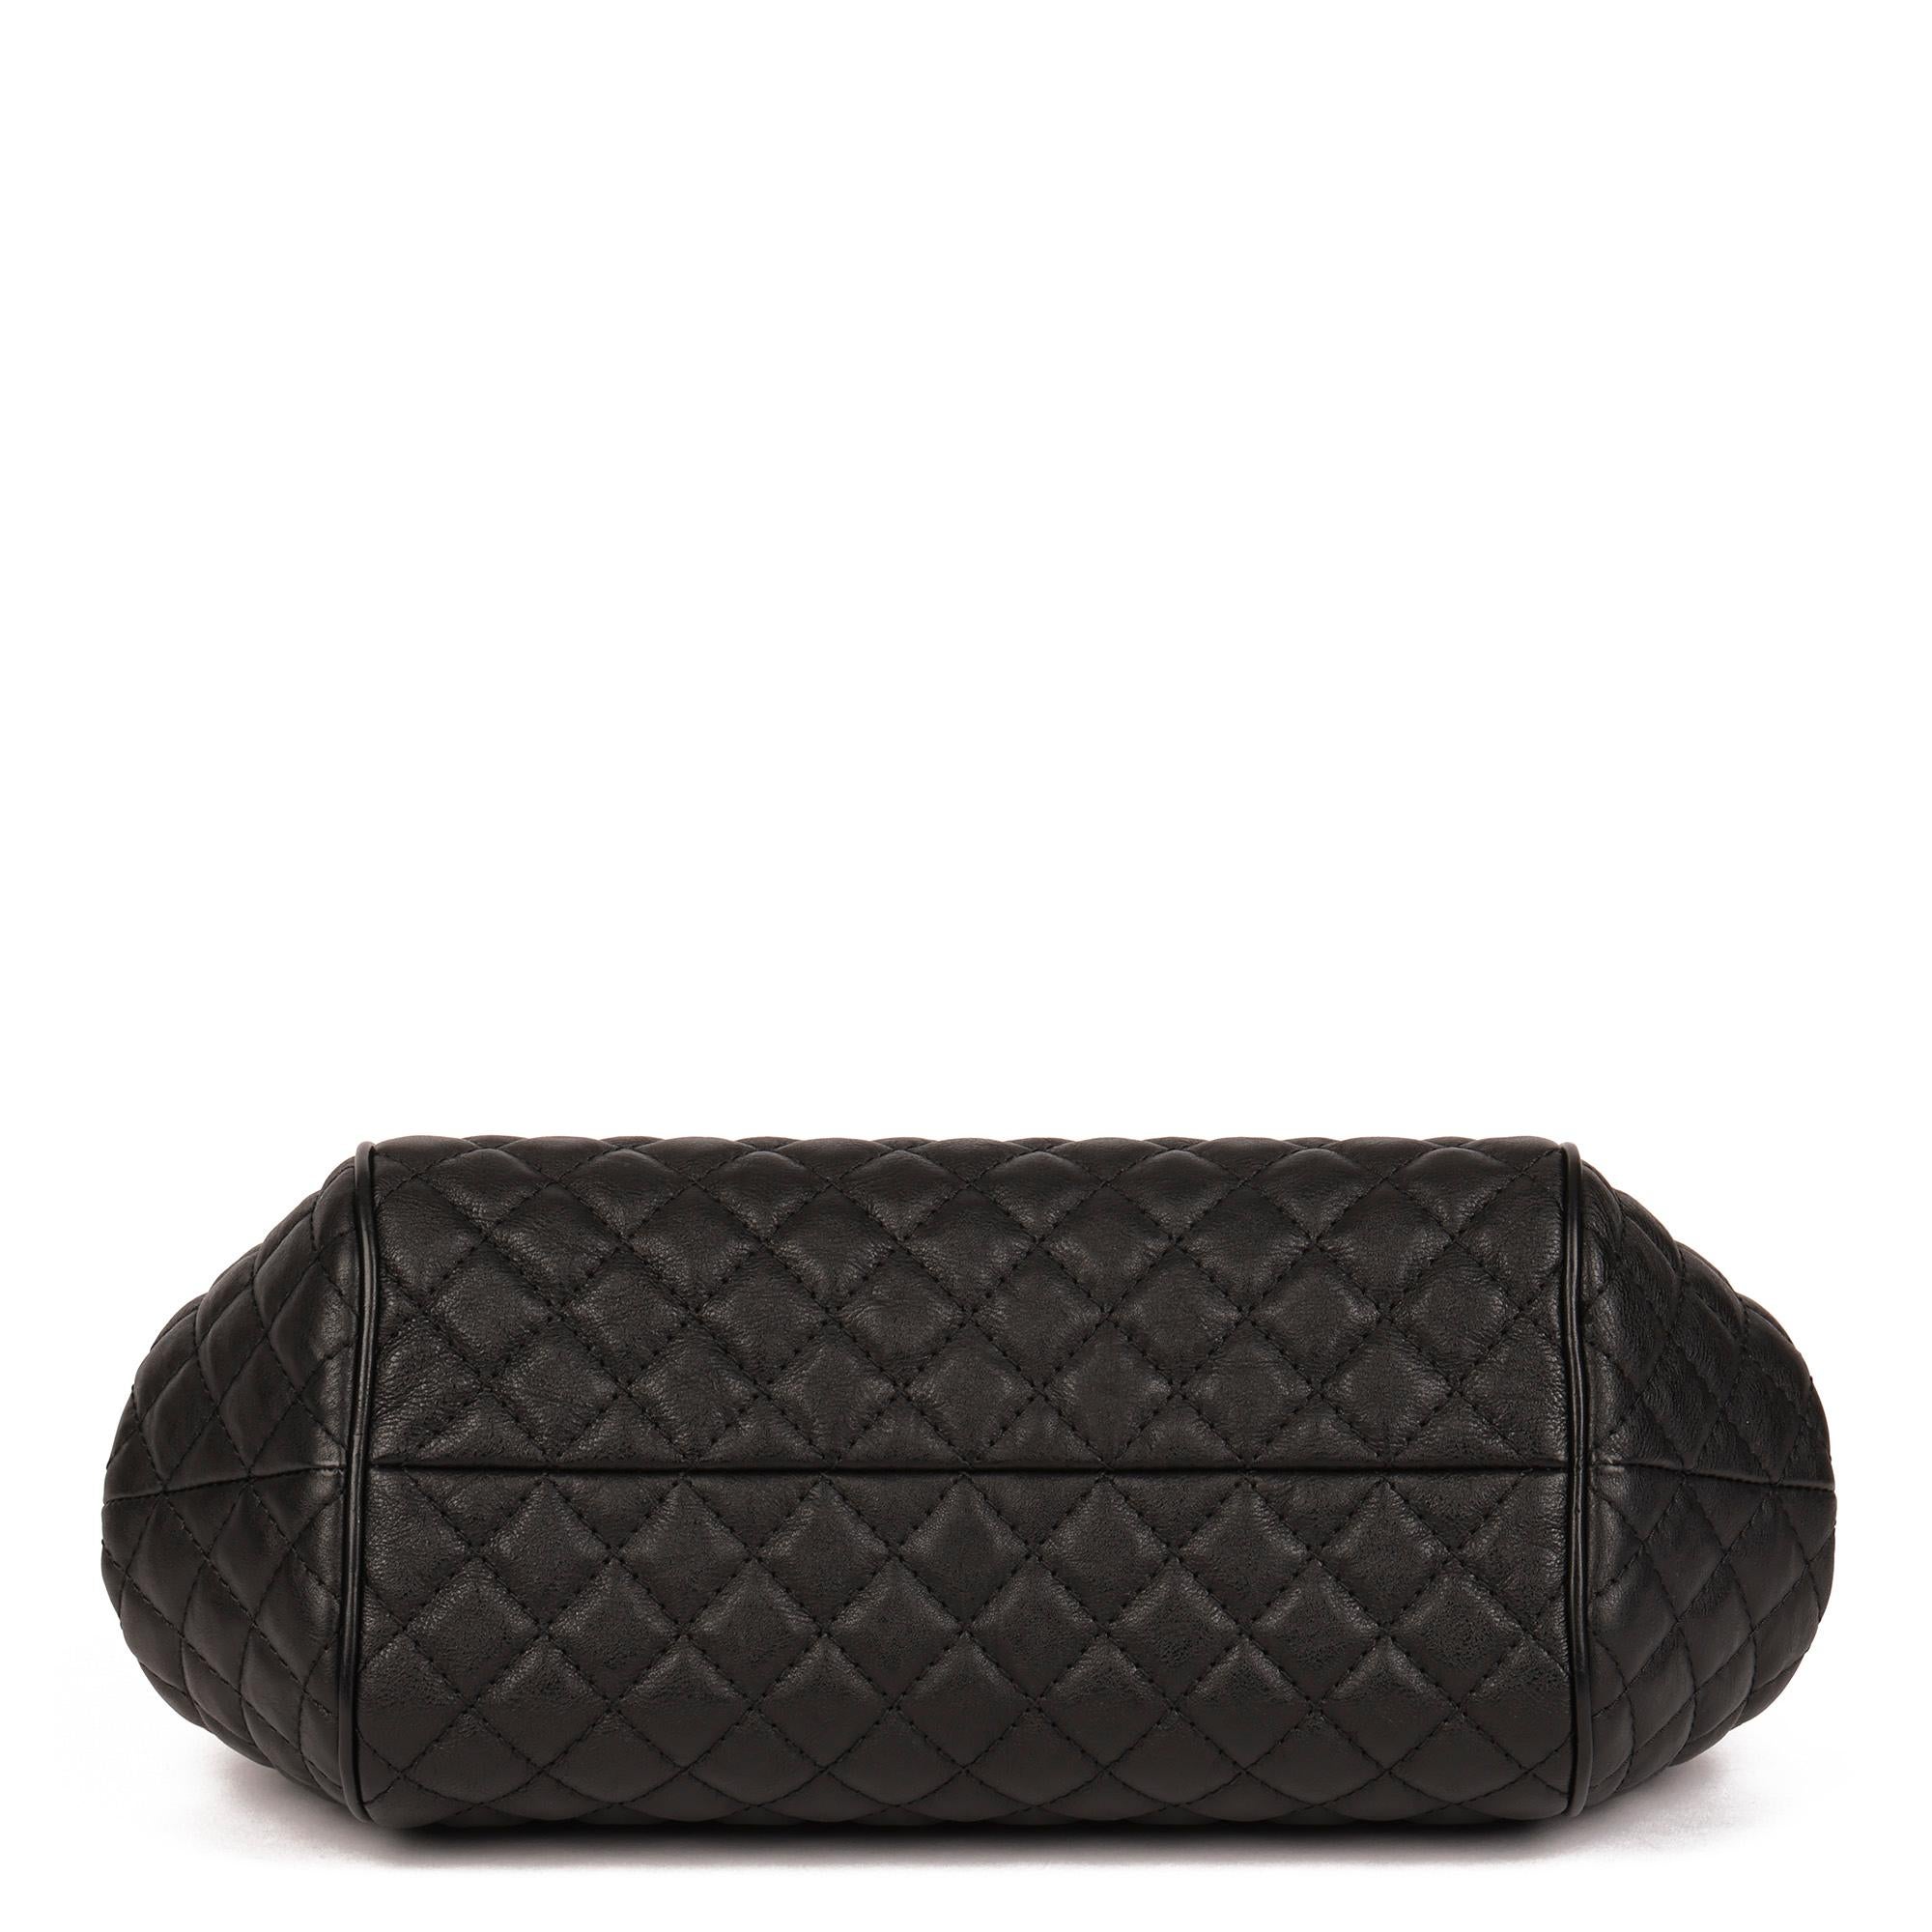 2016 Chanel Black Quilted Calfskin Leather Paris in Rome Colosseum Kiss Lock Bag 1